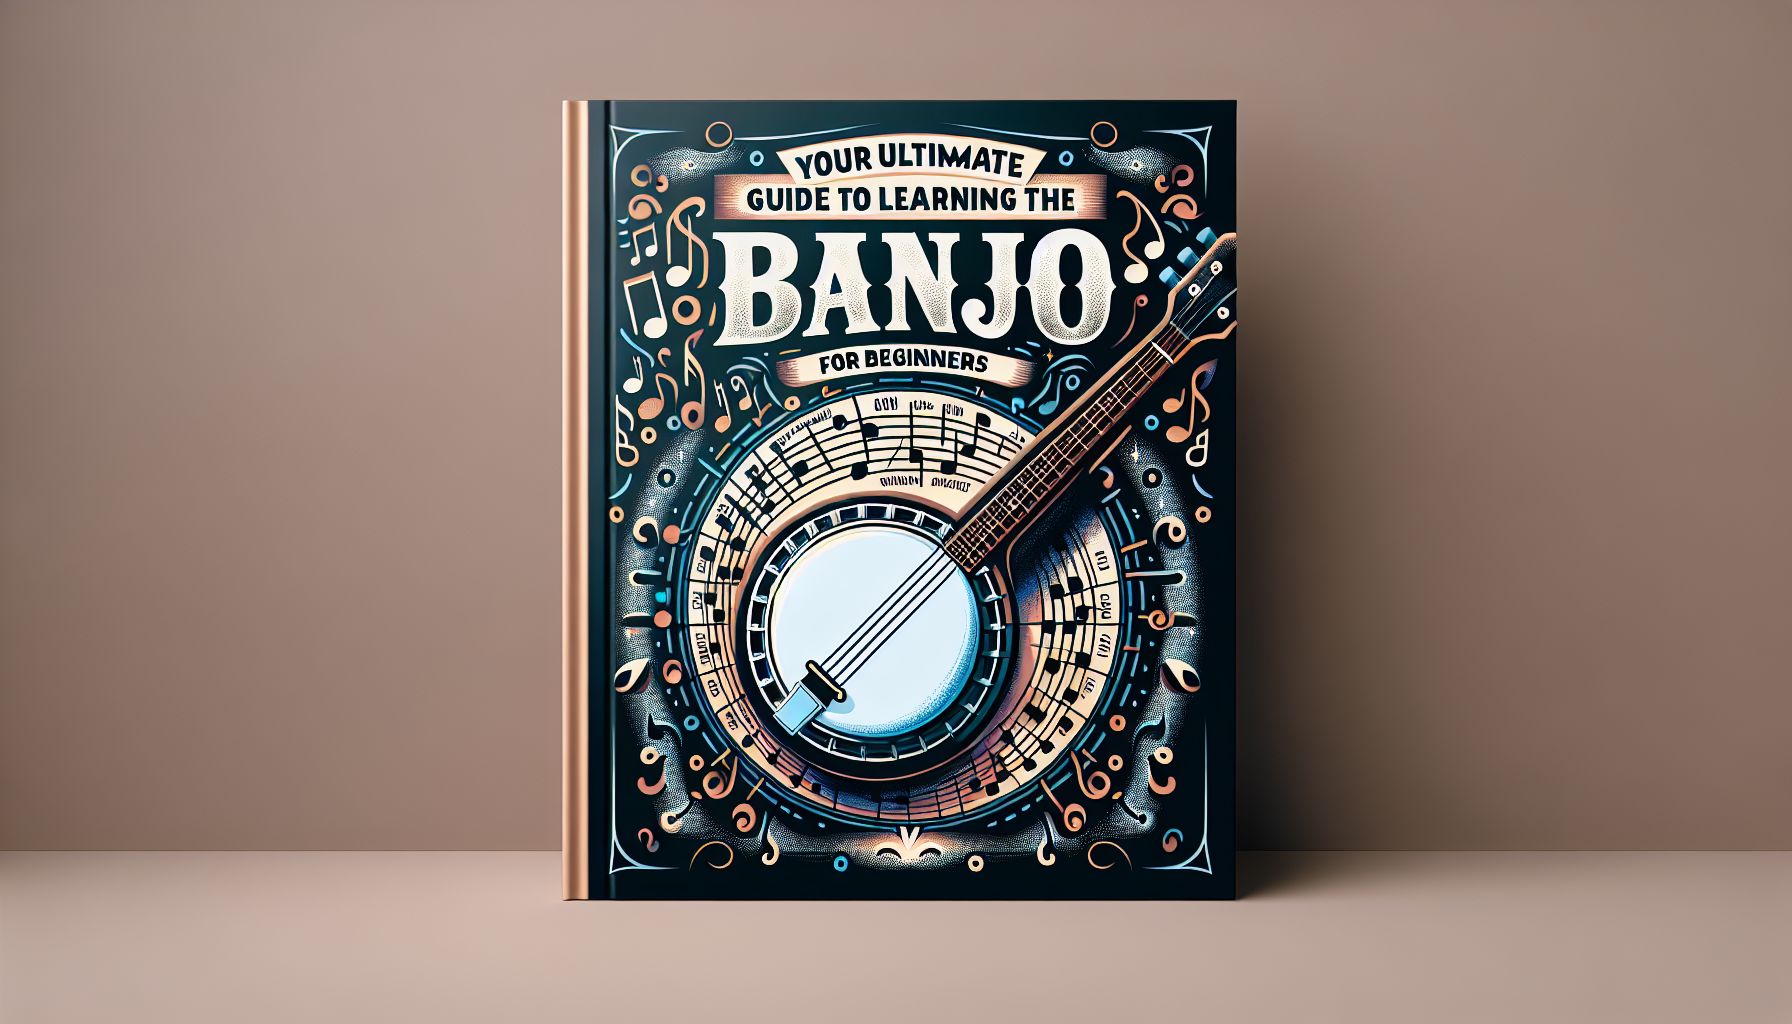 Your Ultimate Guide to Learning the Banjo for Beginners